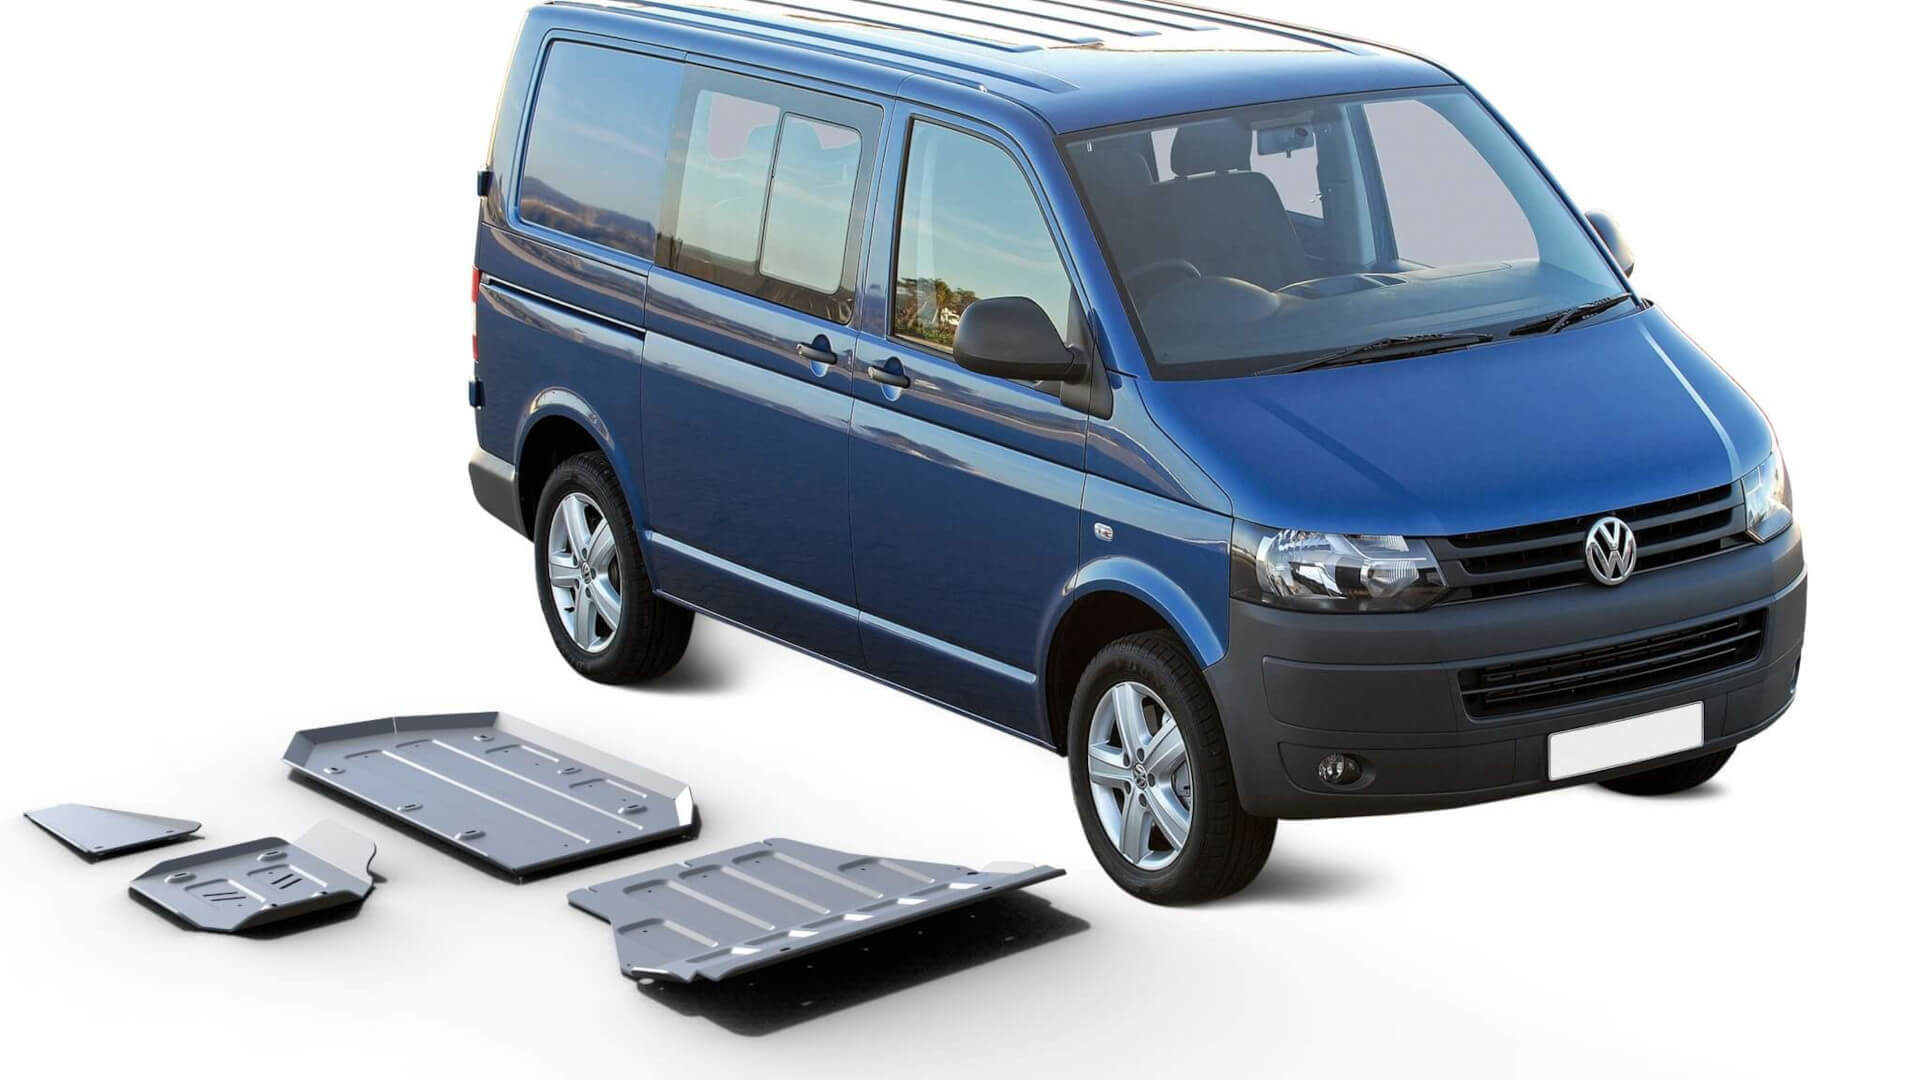 Direct4x4 expedition off-roading underbody protective skid plates for 4x4s, SUVs, pickup trucks and vans.